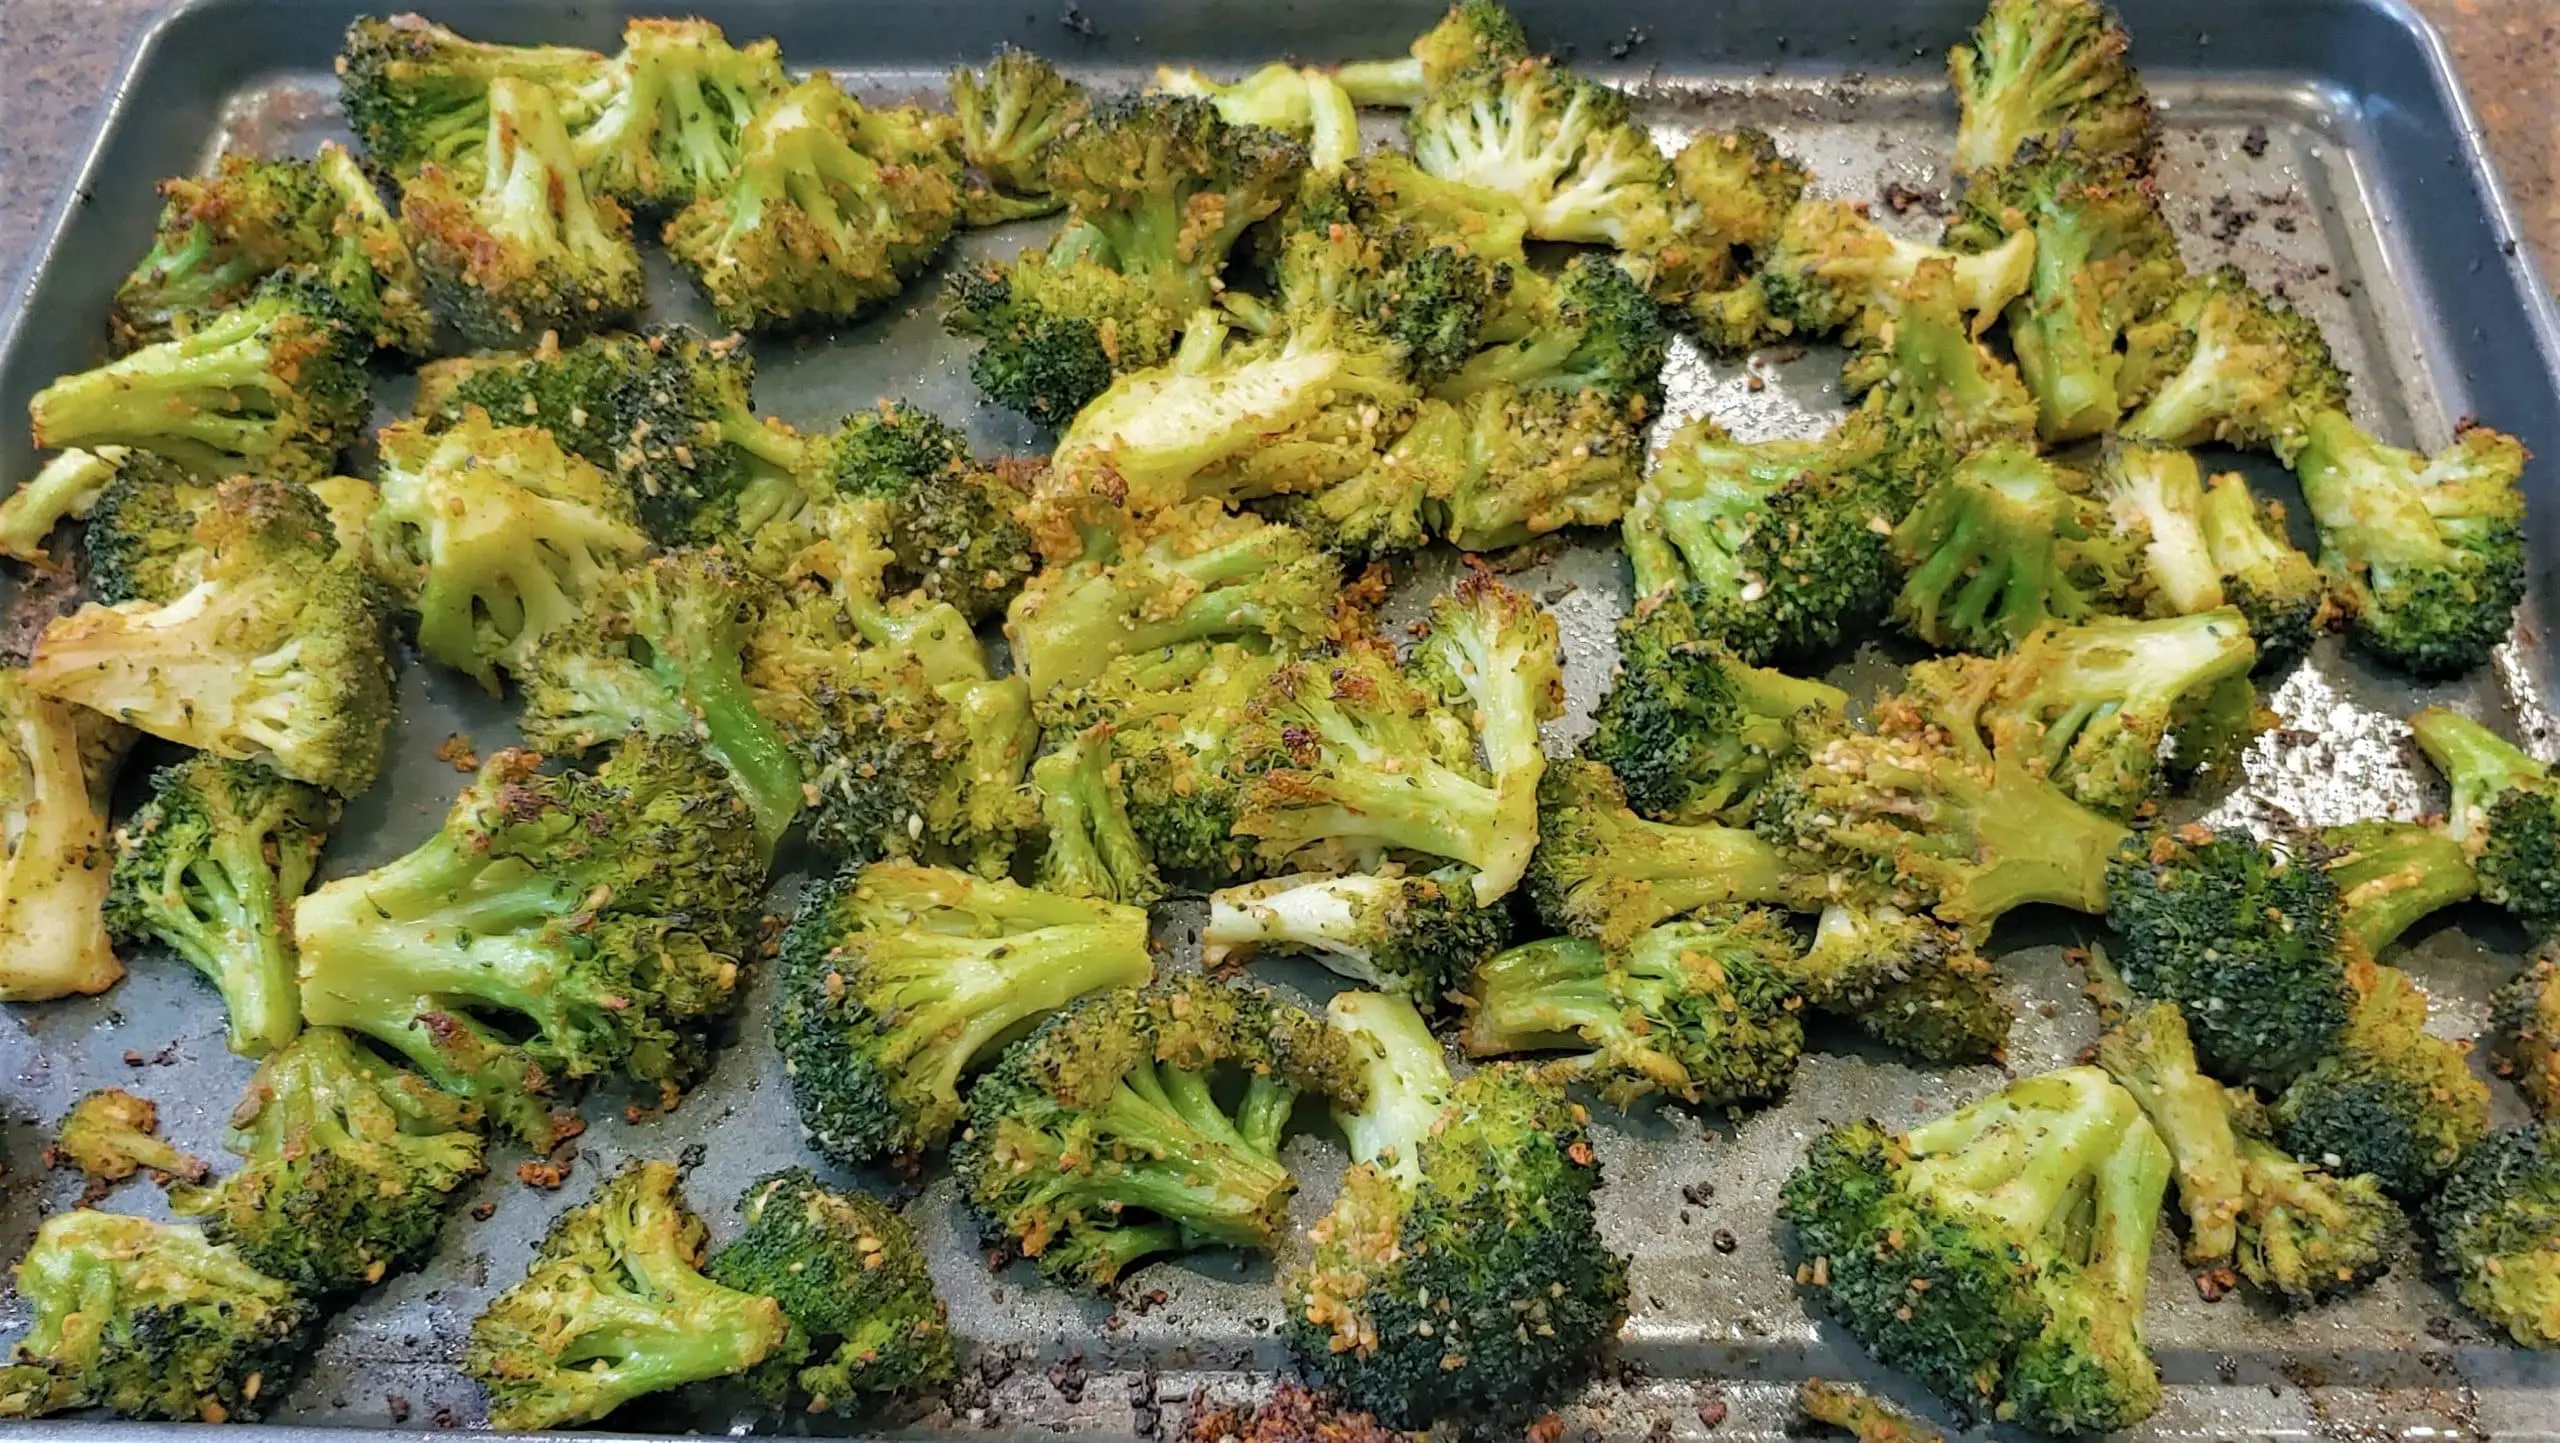 Roasted taco seasoning broccoli - Dining in with Danielle